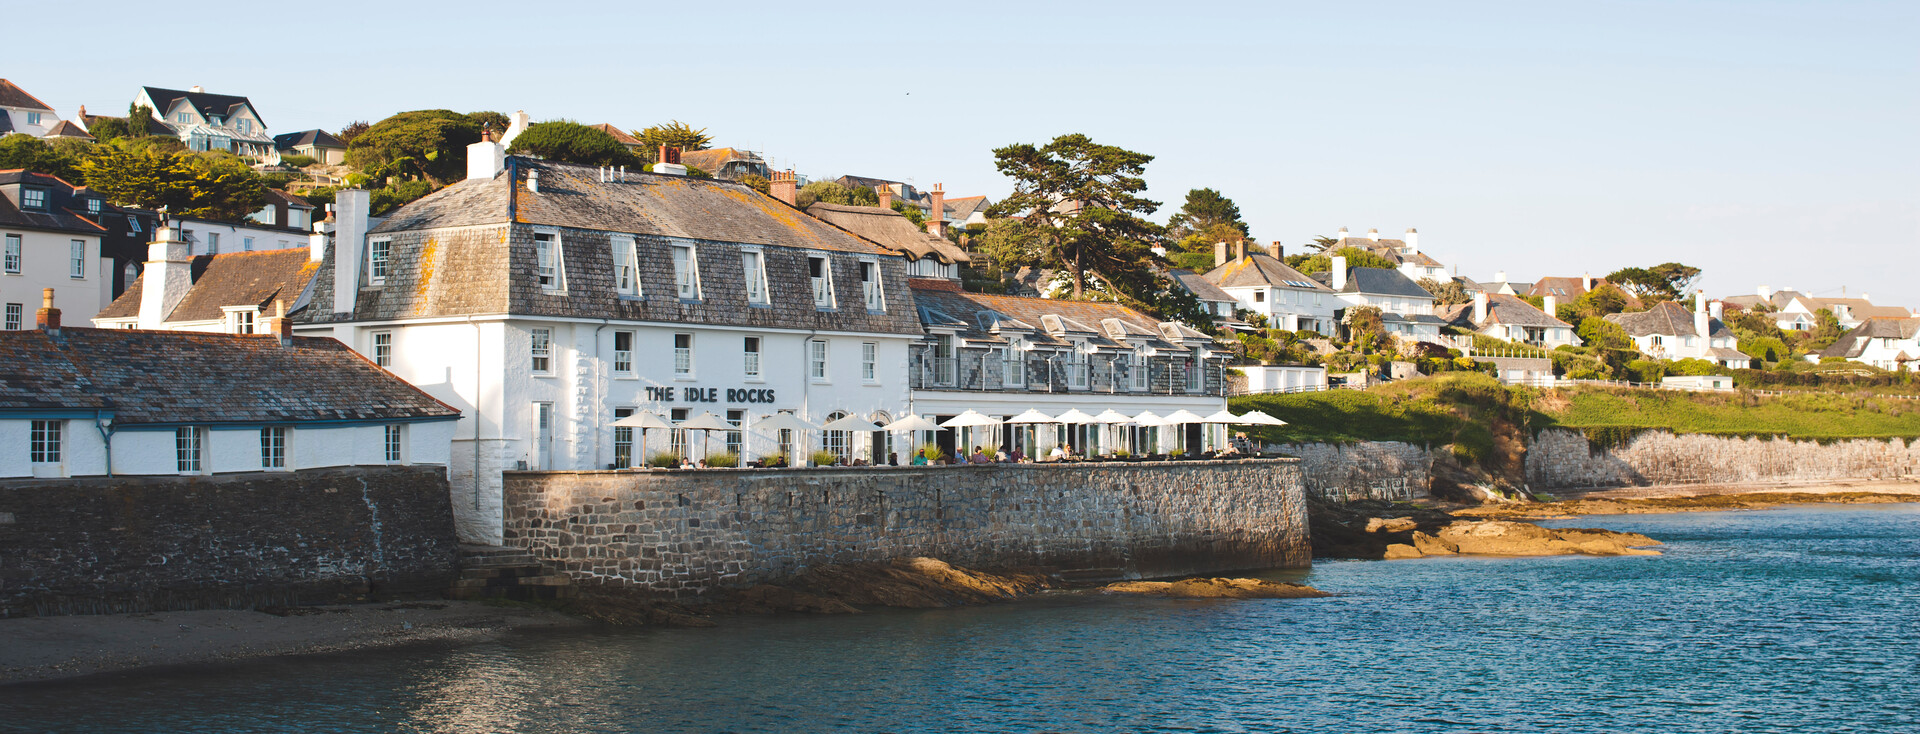 boutique hotel in Cornwall 